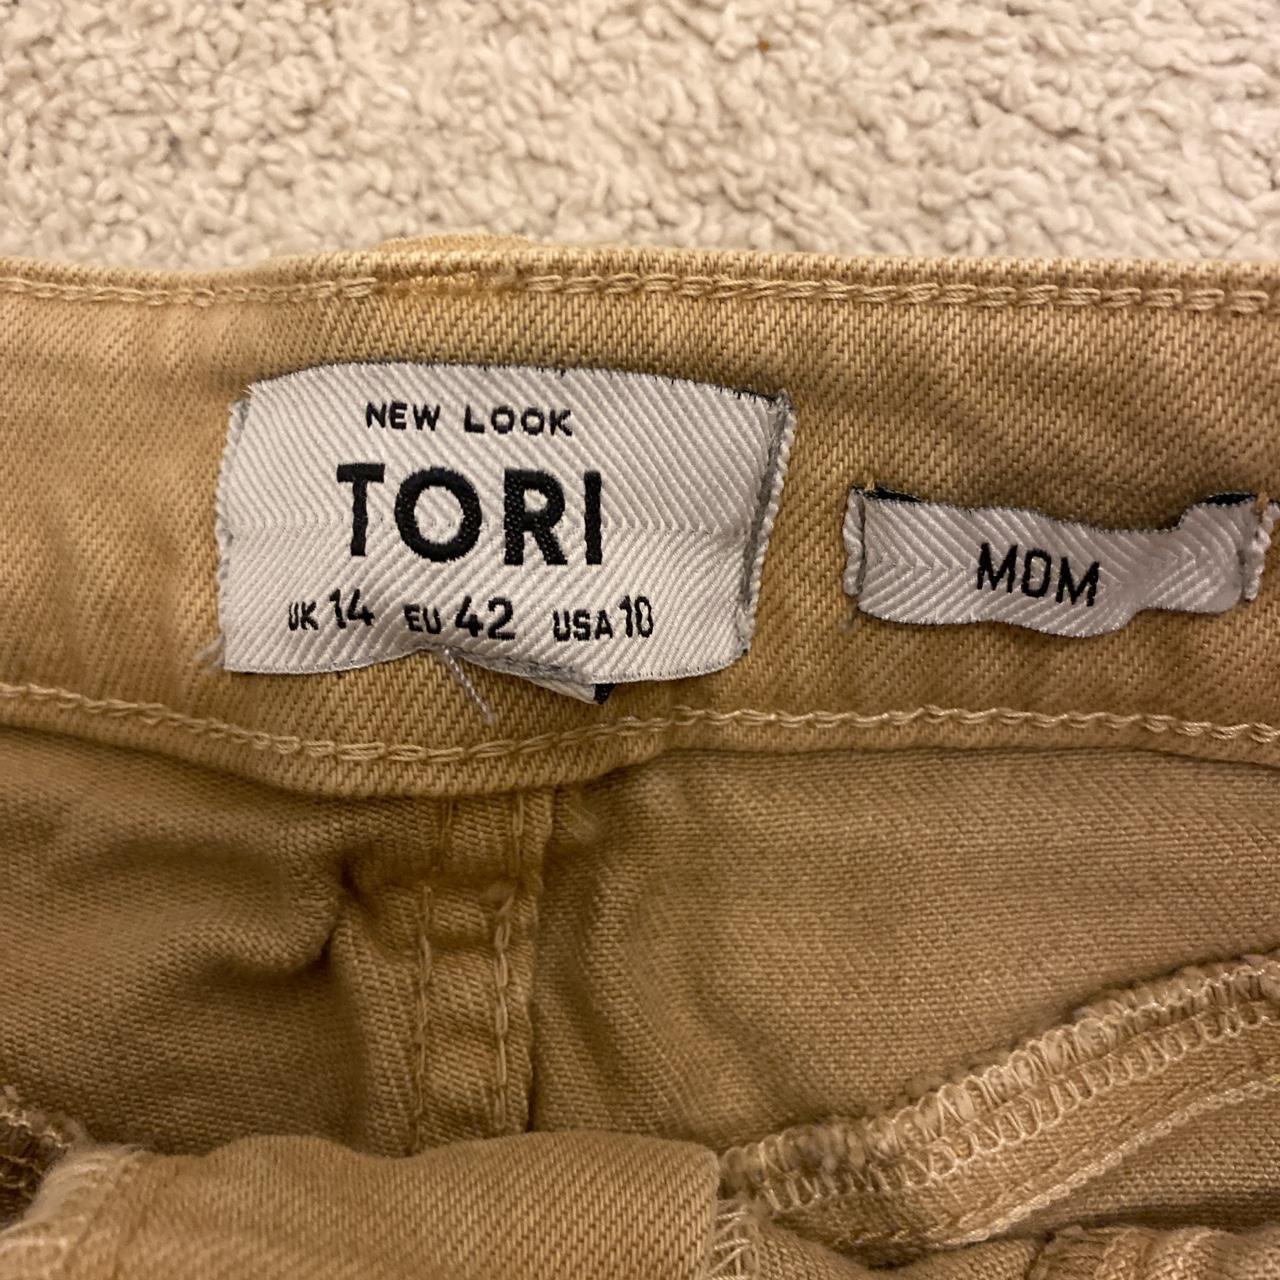 New Look Tori Mom jeans in lovely tan colour. Worn... - Depop